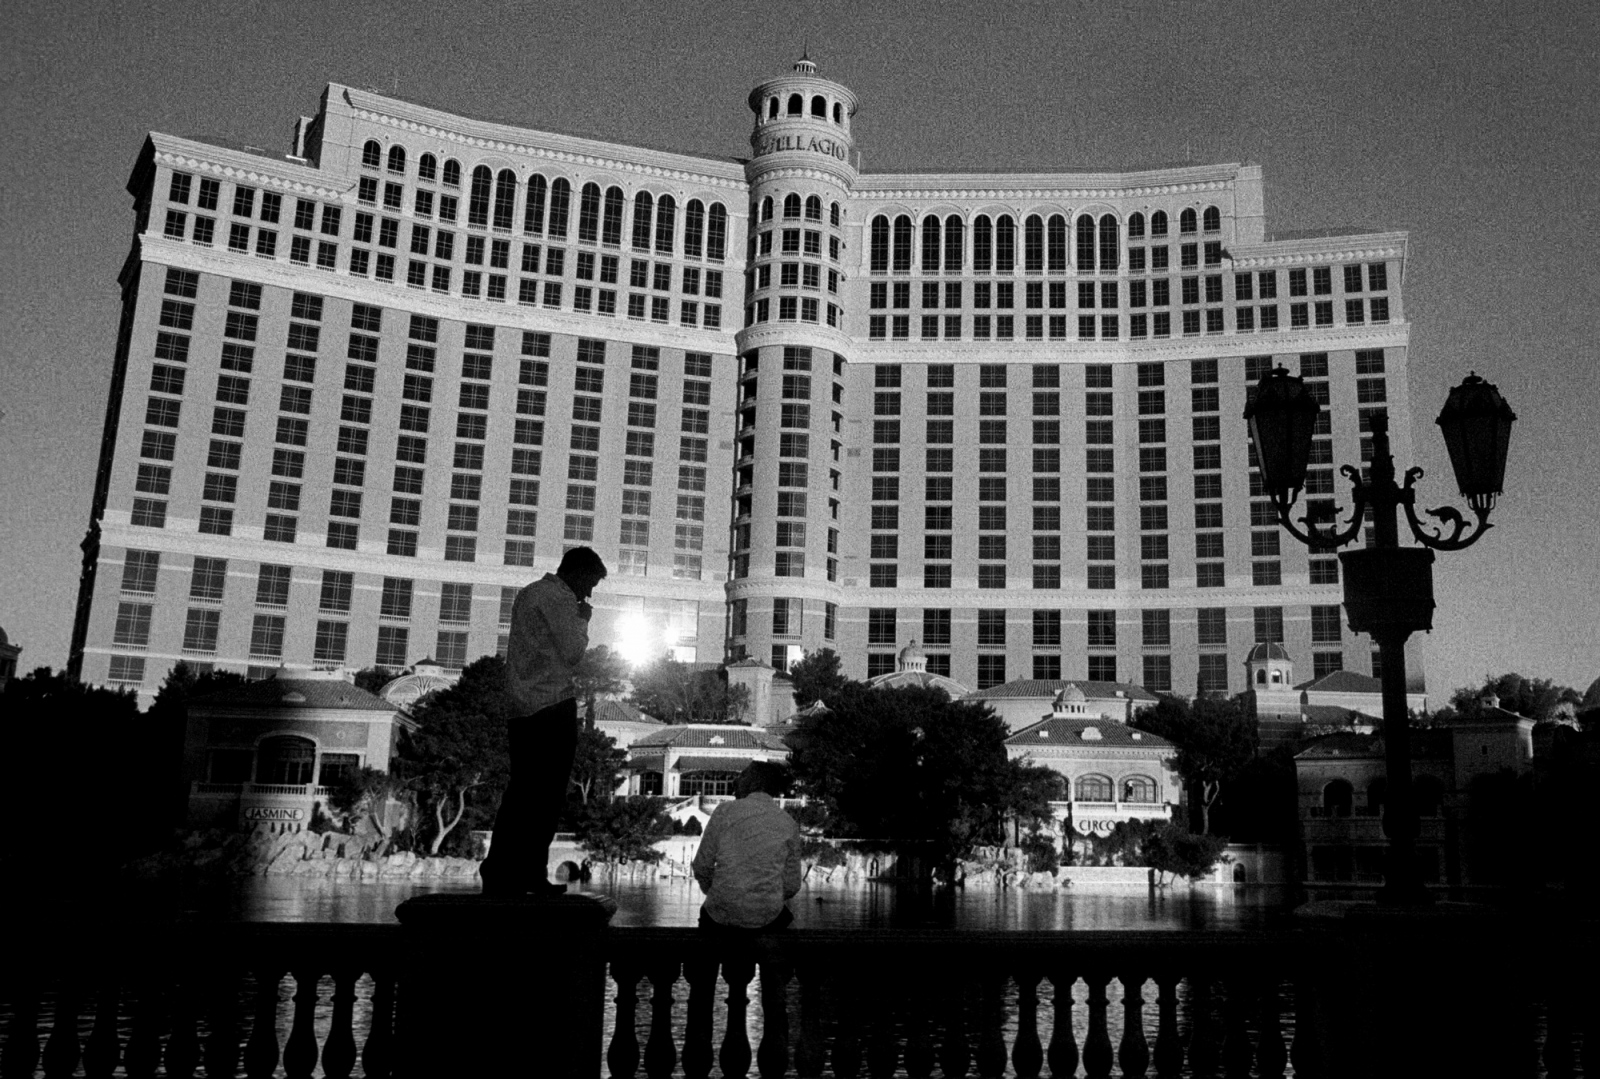 Death of The Colorado - The Bellagio Hotel, a 30 story luxury hotel with a...